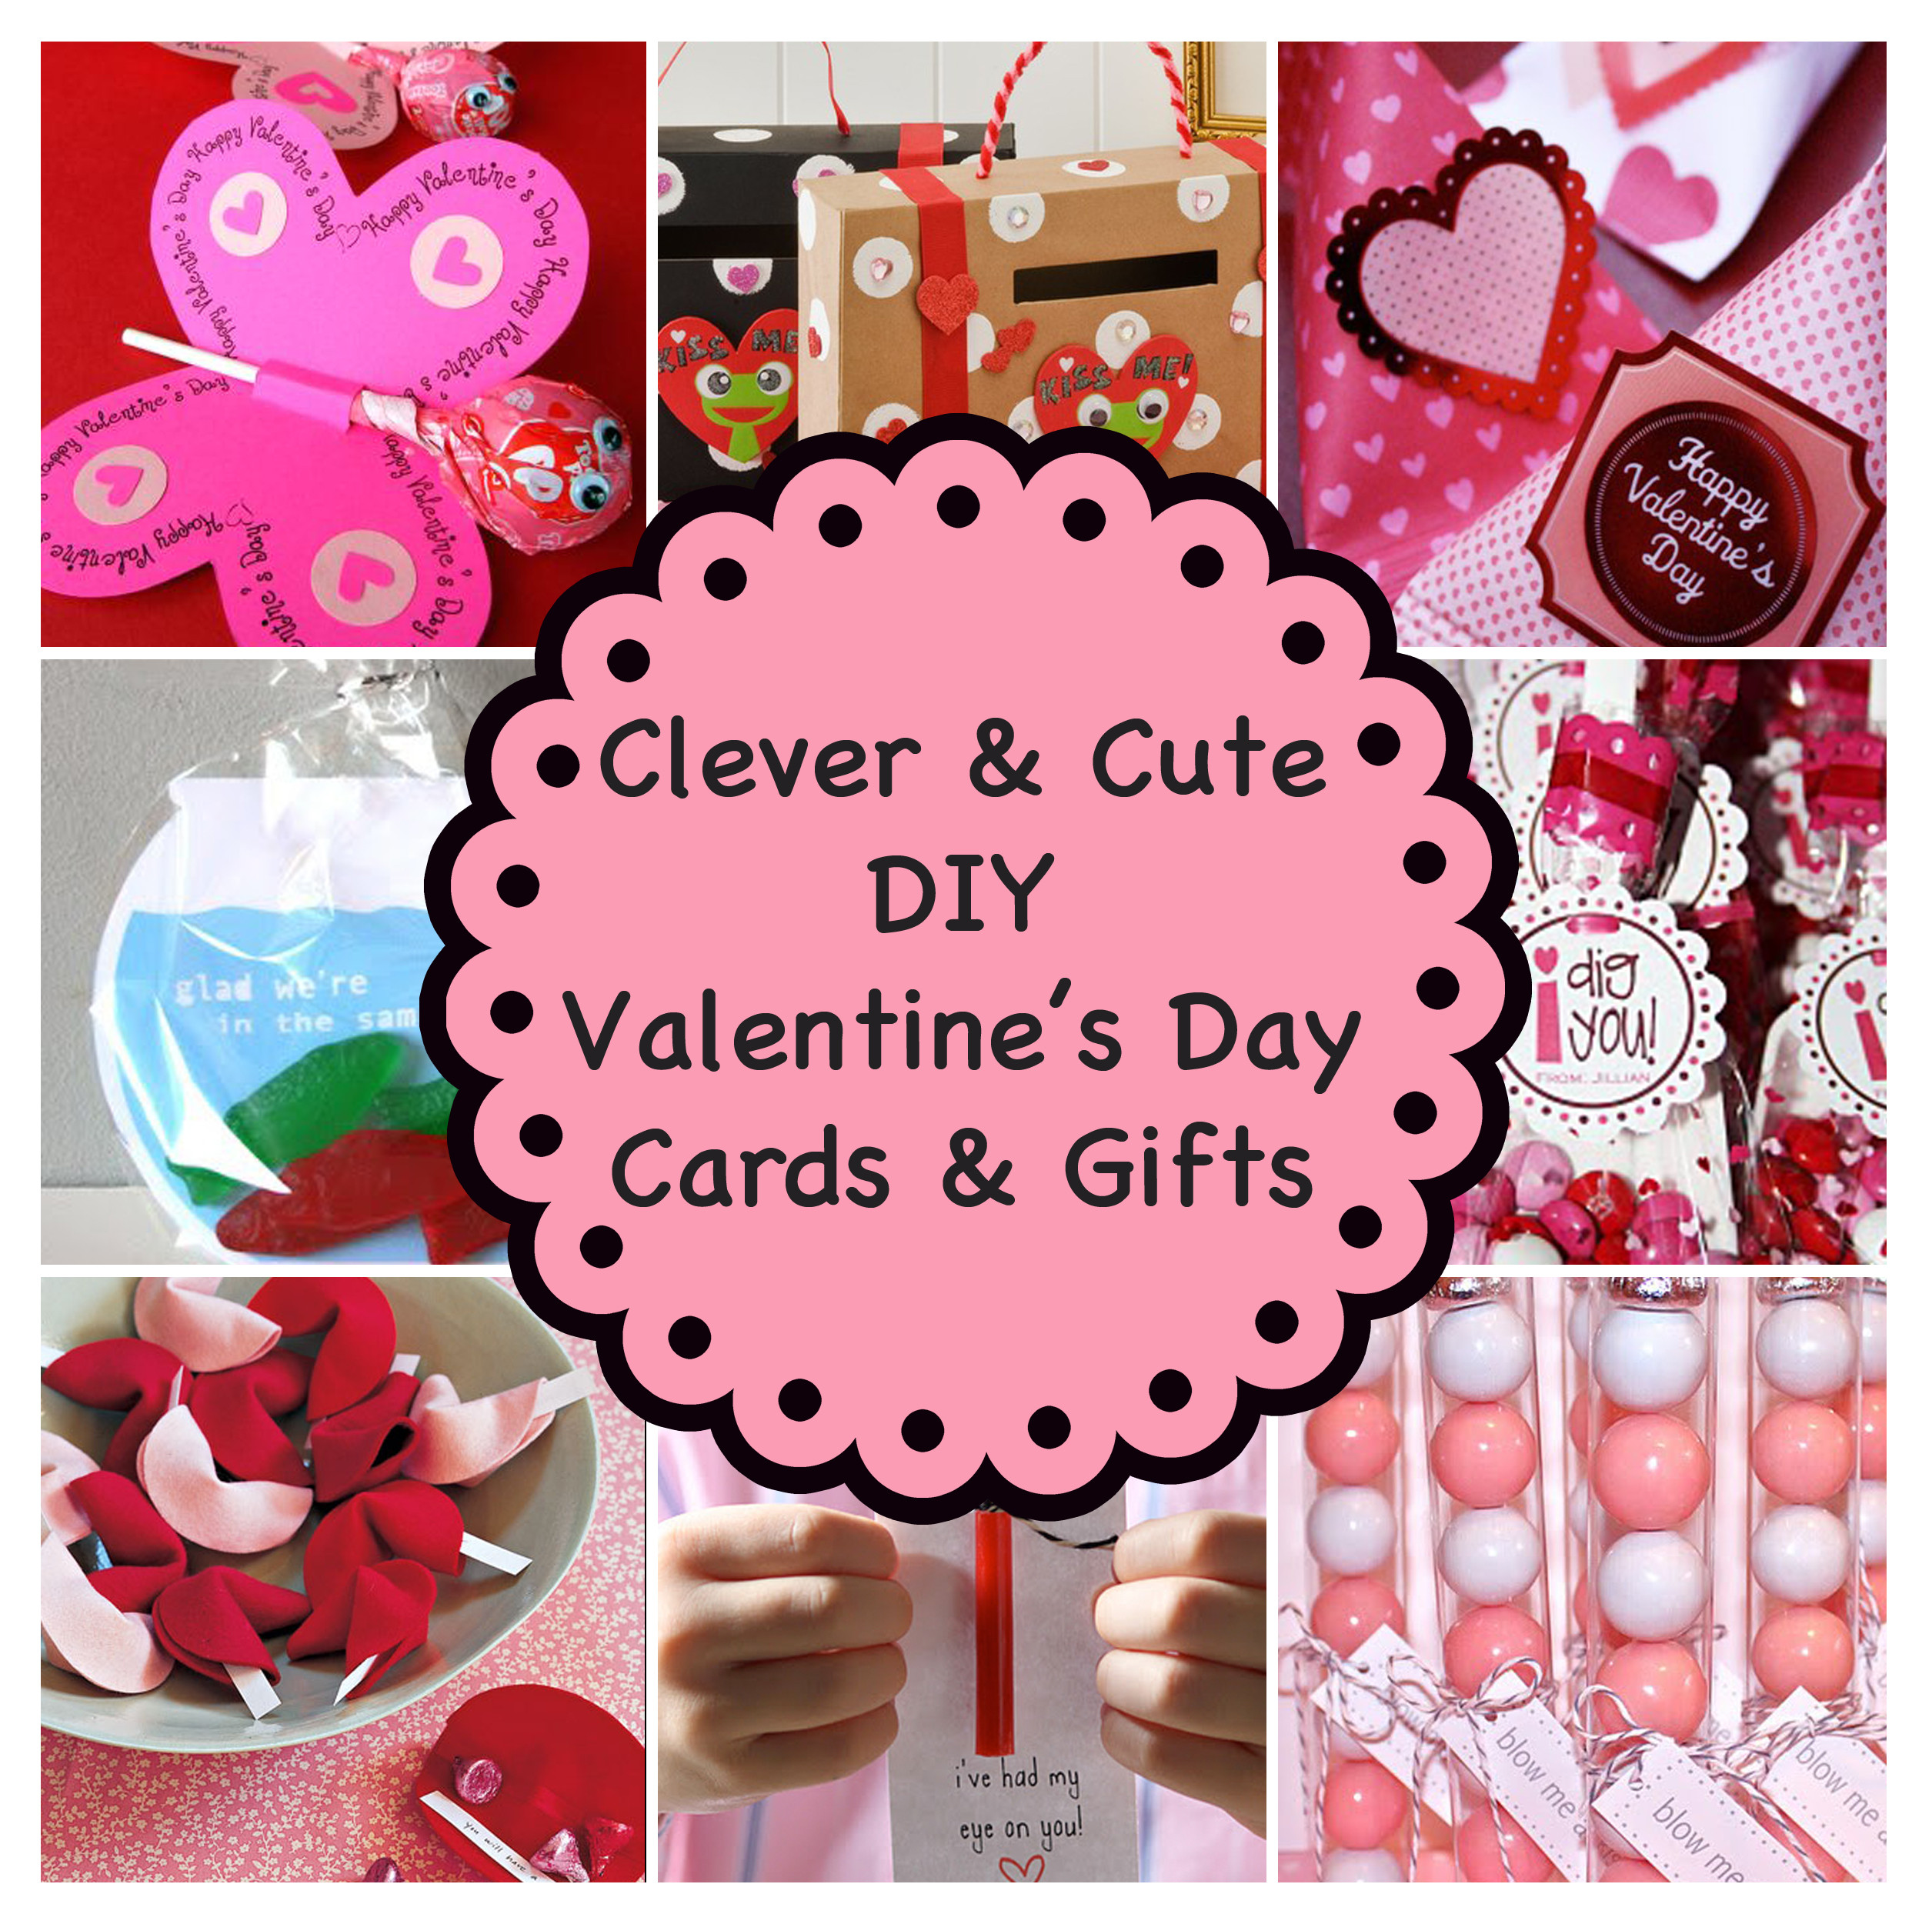 Diy Valentines Day Cards
 Clever and Cute DIY Valentine’s Day Cards & Gifts